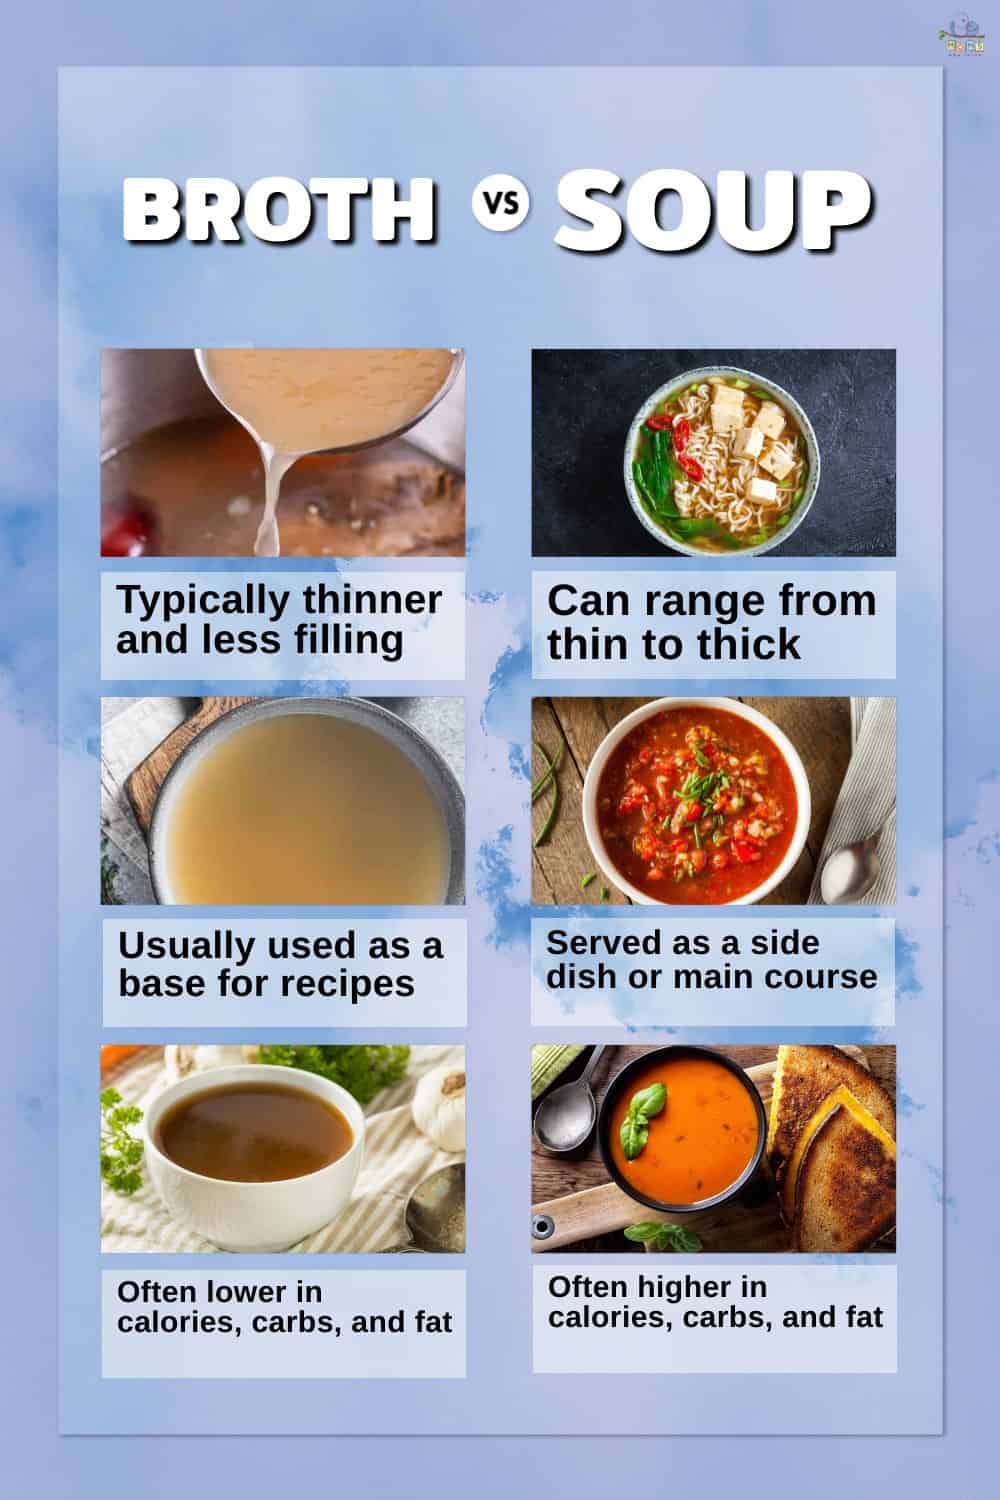 Infographic comparing broth and soup.